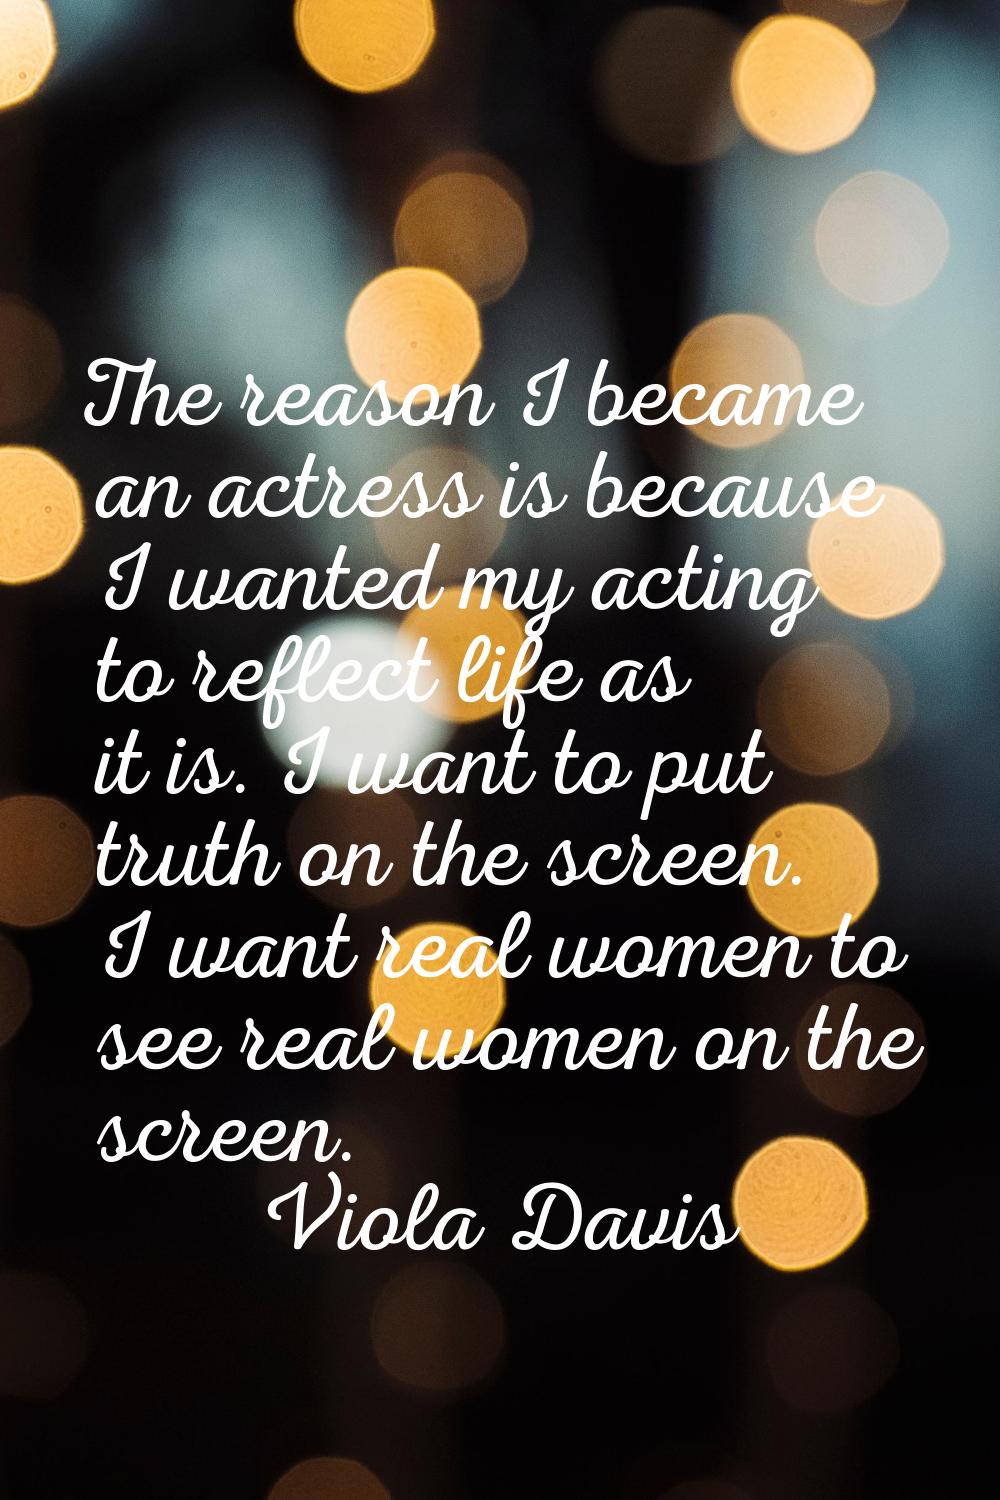 The reason I became an actress is because I wanted my acting to reflect life as it is. I want to pu